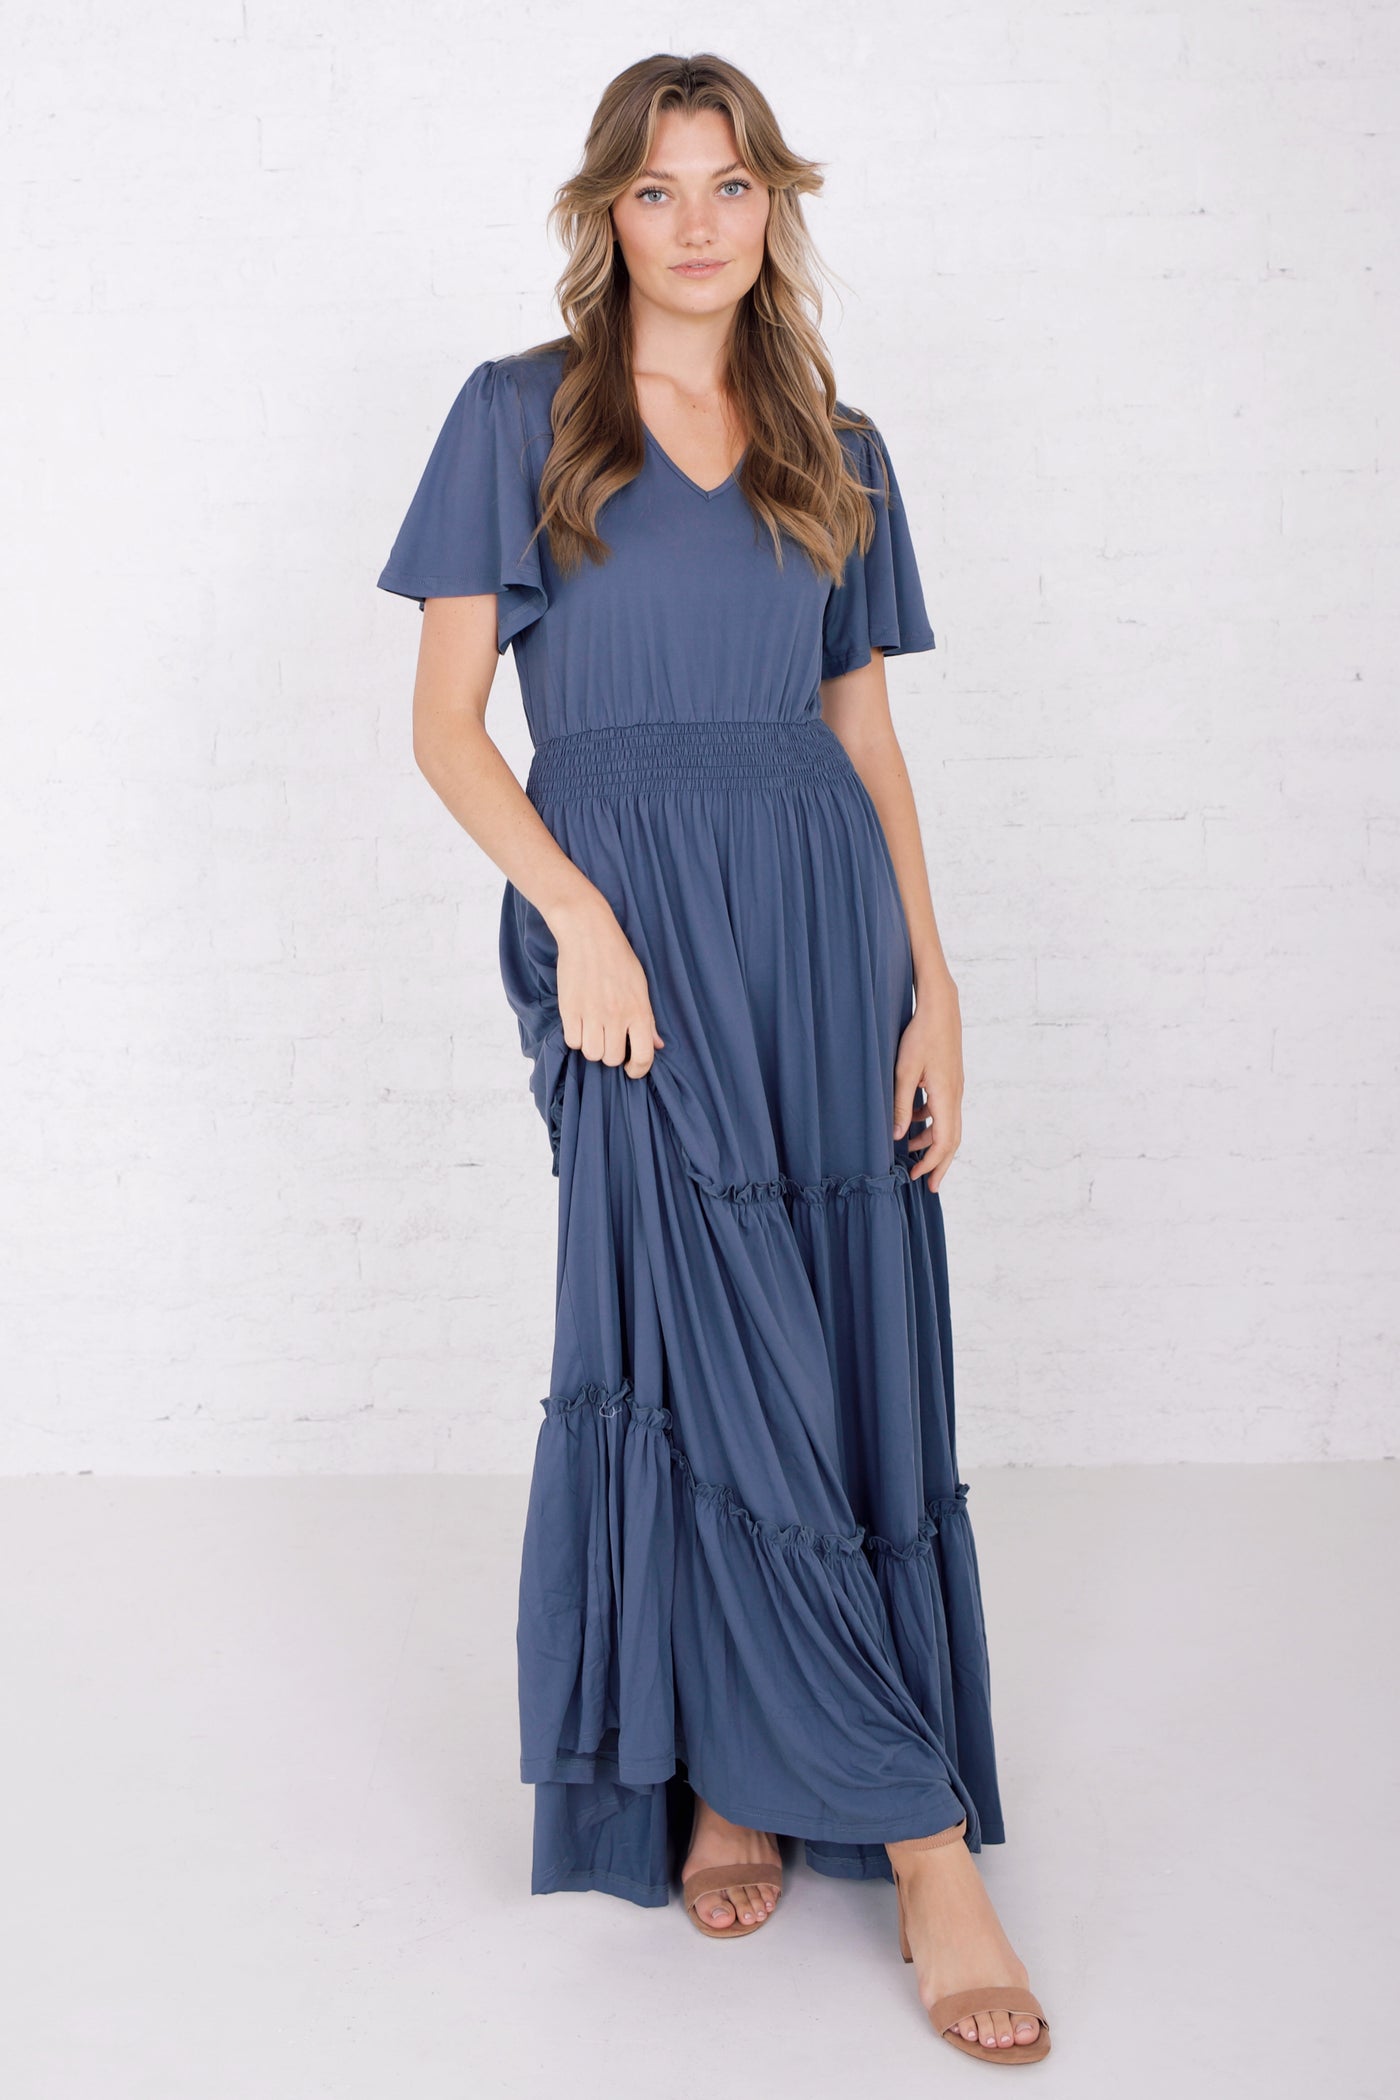 A Midi dress in the color cove night shadow with a smocked waist and tiered bottom. Modest Clothing - Modest Dresses - Modest Bridesmaid Dresses